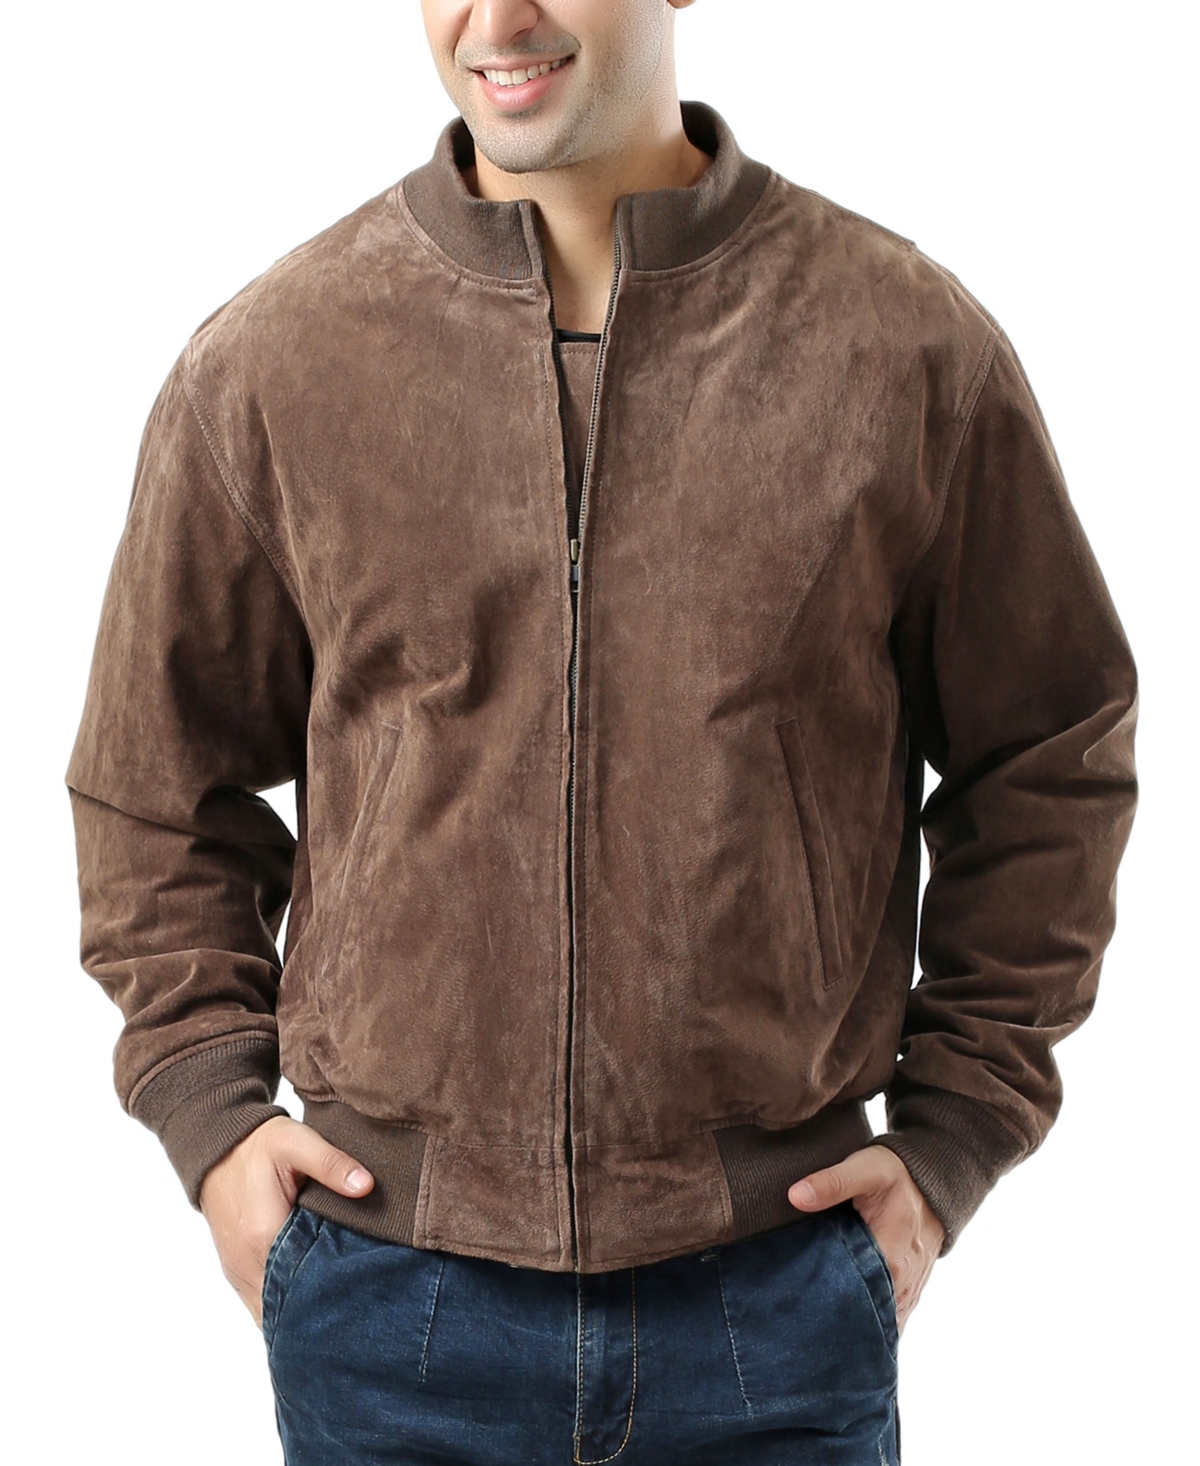 Men Wwii Suede Leather Tanker Jacket - Big and Tall - Tobacco